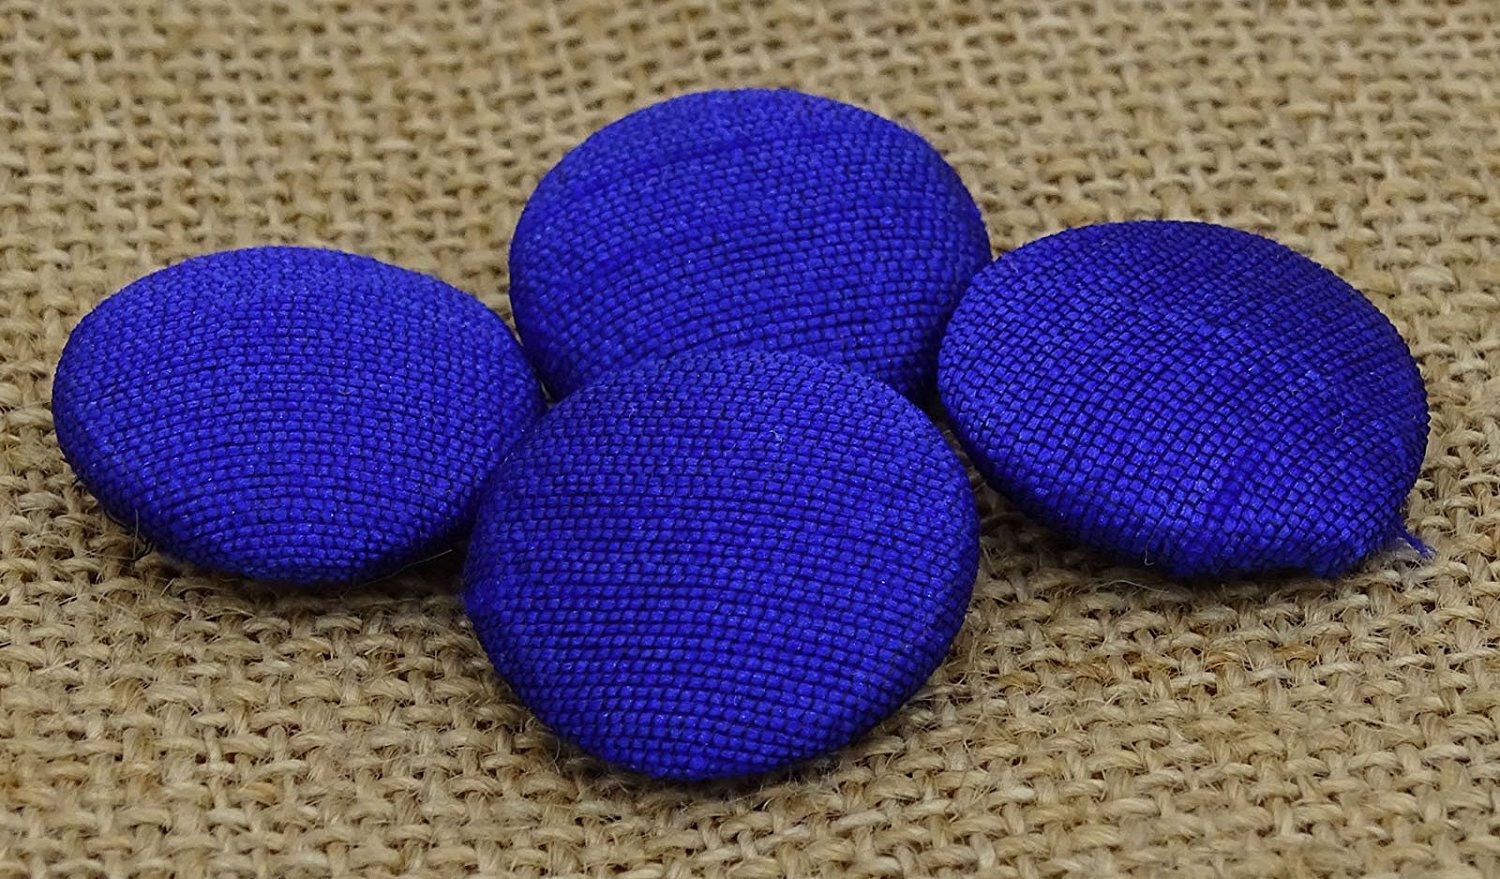 Hole Button Covers  Small Holes in Clothes - Fifty & Fab